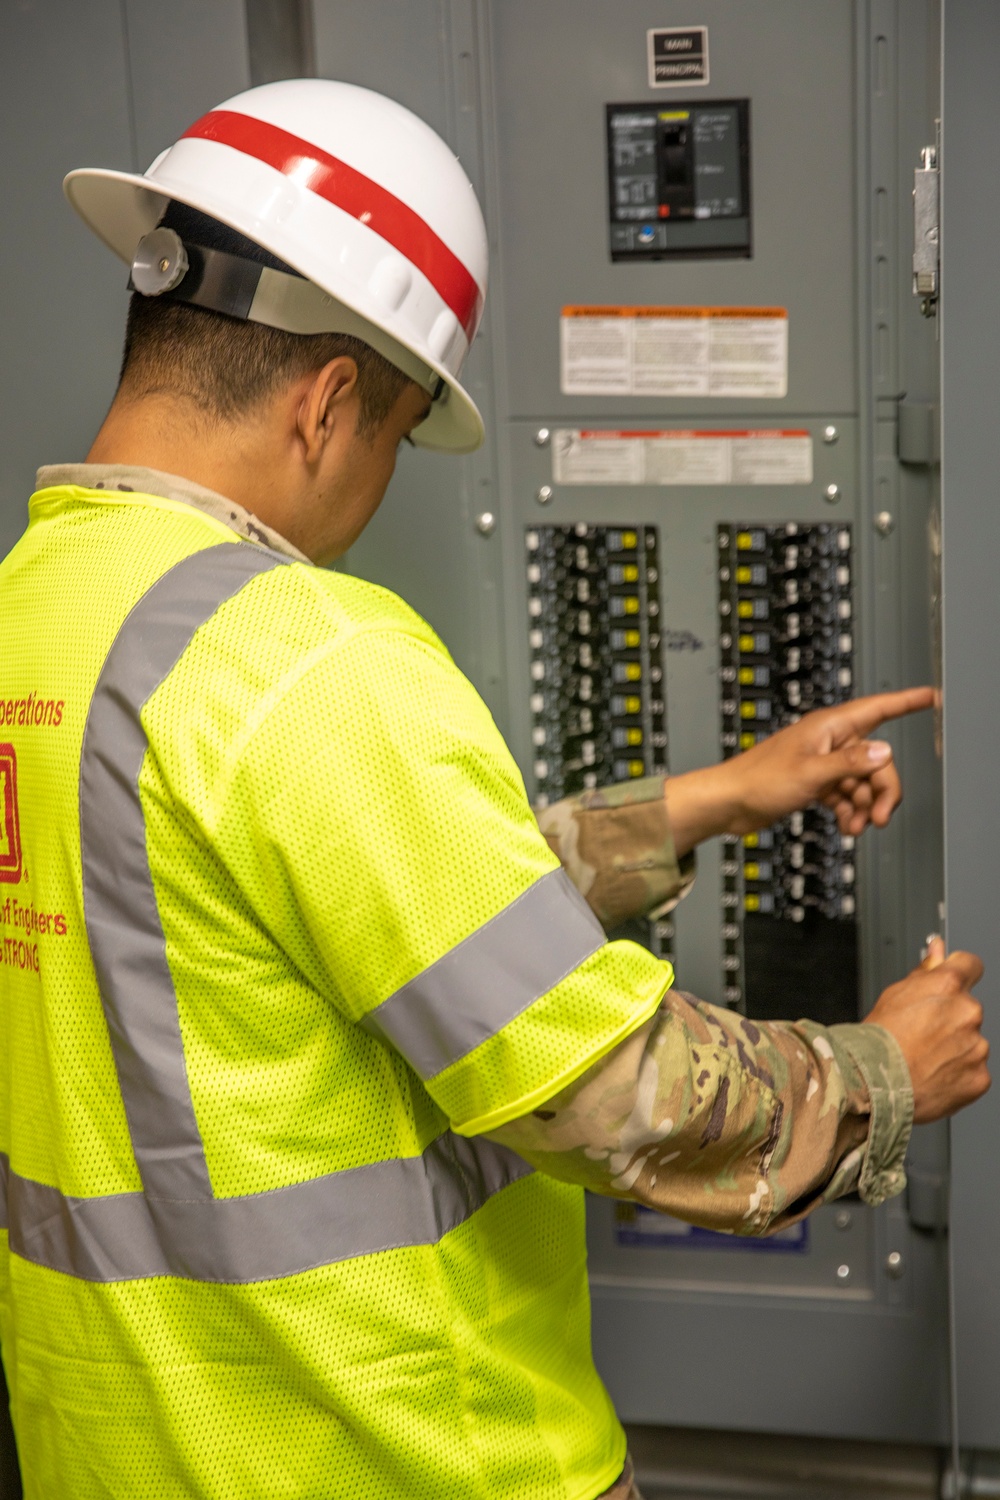 249th Engineering Battalion Emergency Power Assessments